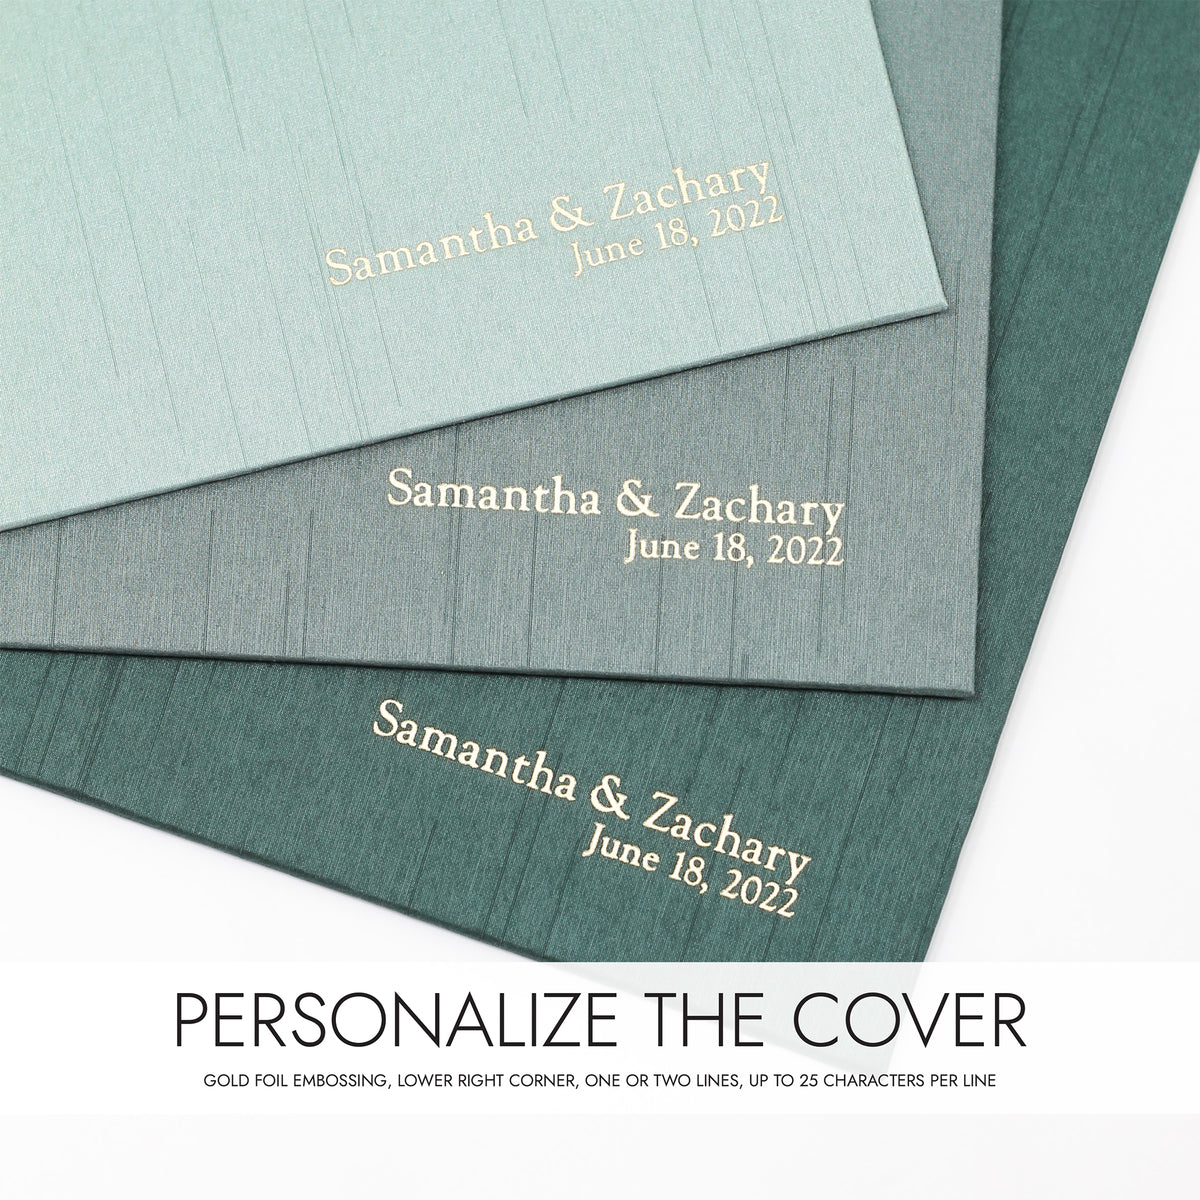 Large Paper Page Album With Teal Blue Silk Cover